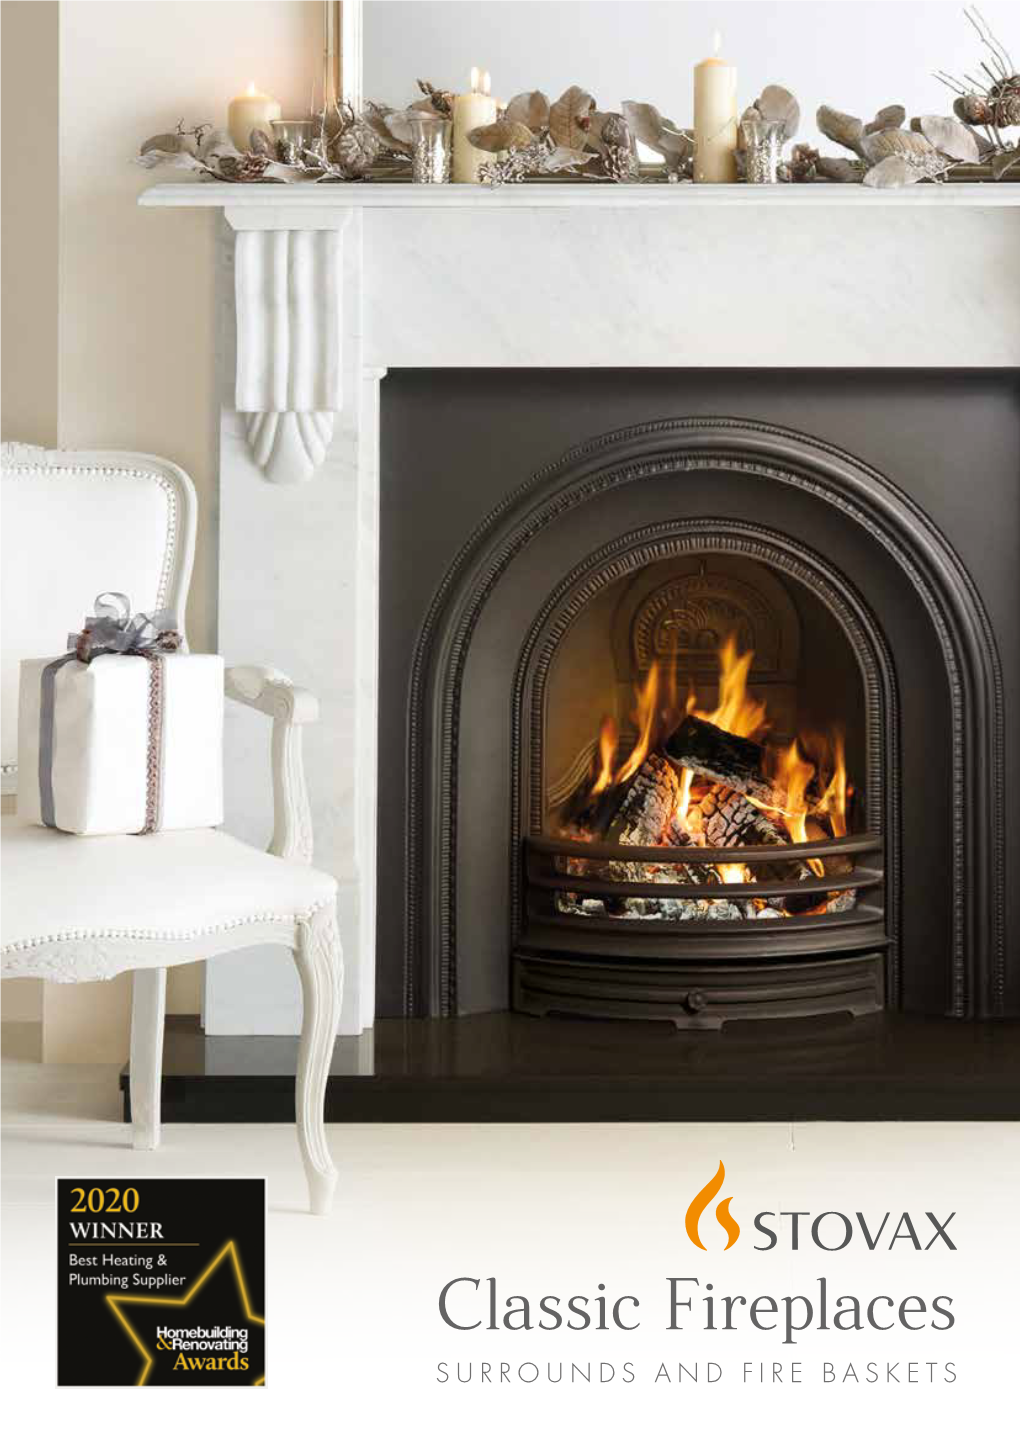 Classic Fireplaces SURROUNDS and FIRE BASKETS Traditional Style with a MODERN TWIST